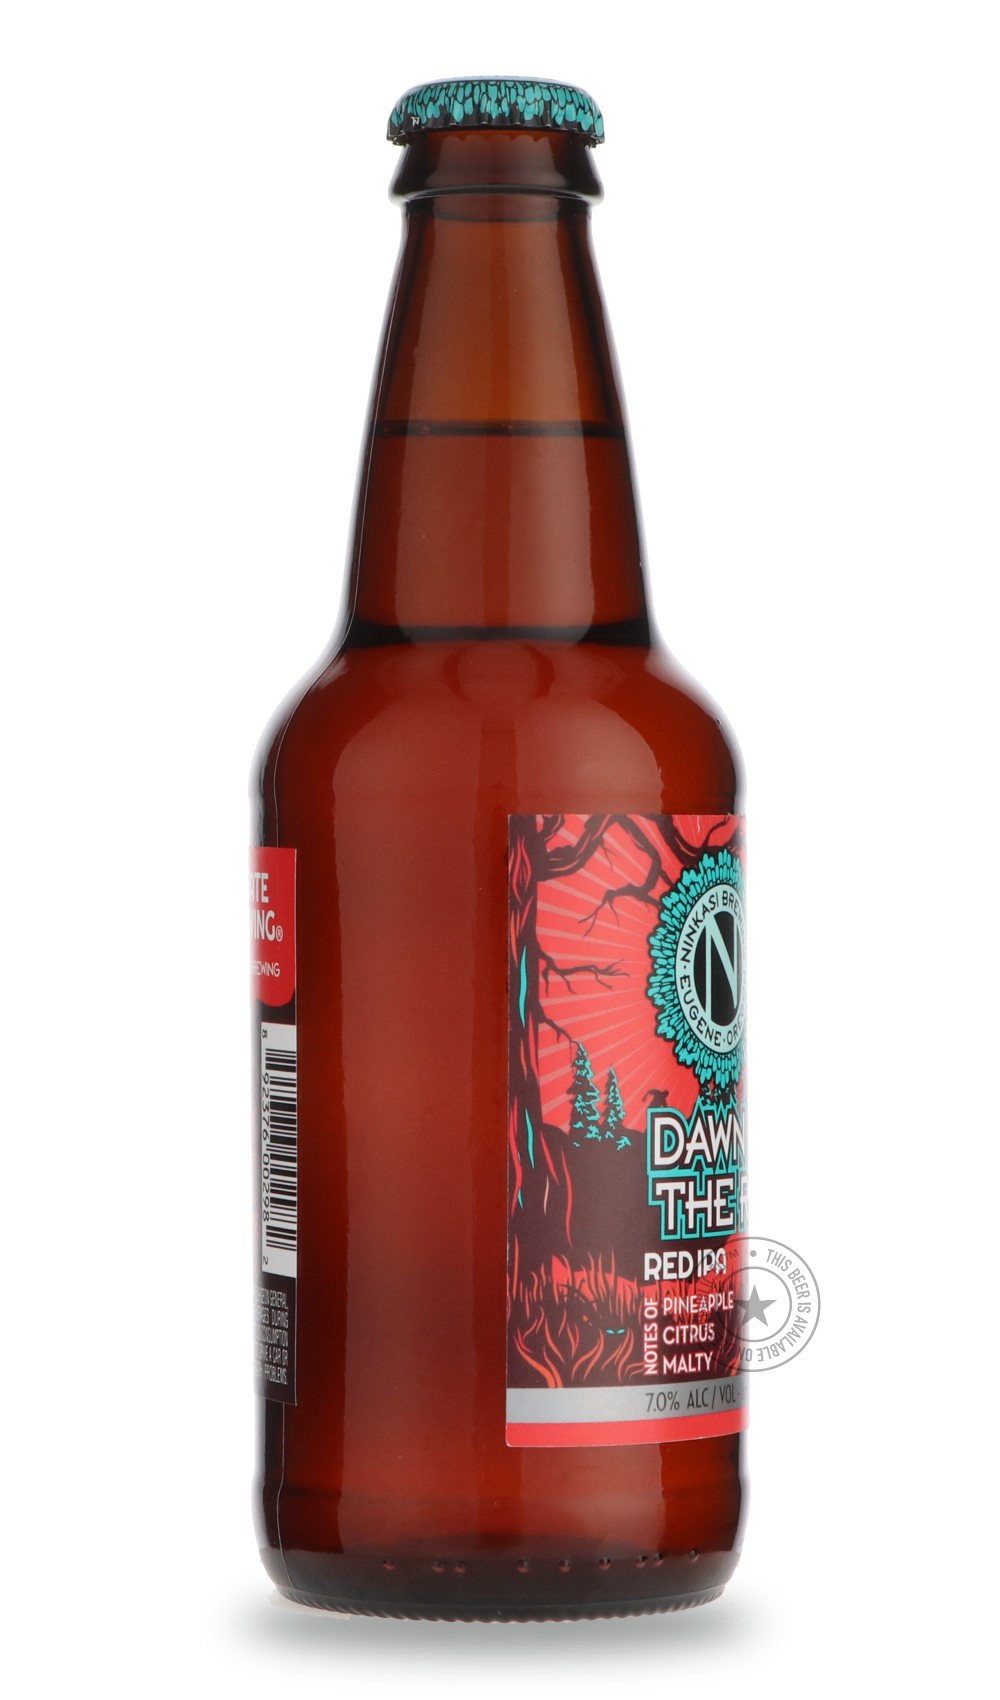 -Ninkasi- Dawn of the Red-IPA- Only @ Beer Republic - The best online beer store for American & Canadian craft beer - Buy beer online from the USA and Canada - Bier online kopen - Amerikaans bier kopen - Craft beer store - Craft beer kopen - Amerikanisch bier kaufen - Bier online kaufen - Acheter biere online - IPA - Stout - Porter - New England IPA - Hazy IPA - Imperial Stout - Barrel Aged - Barrel Aged Imperial Stout - Brown - Dark beer - Blond - Blonde - Pilsner - Lager - Wheat - Weizen - Amber - Barley 